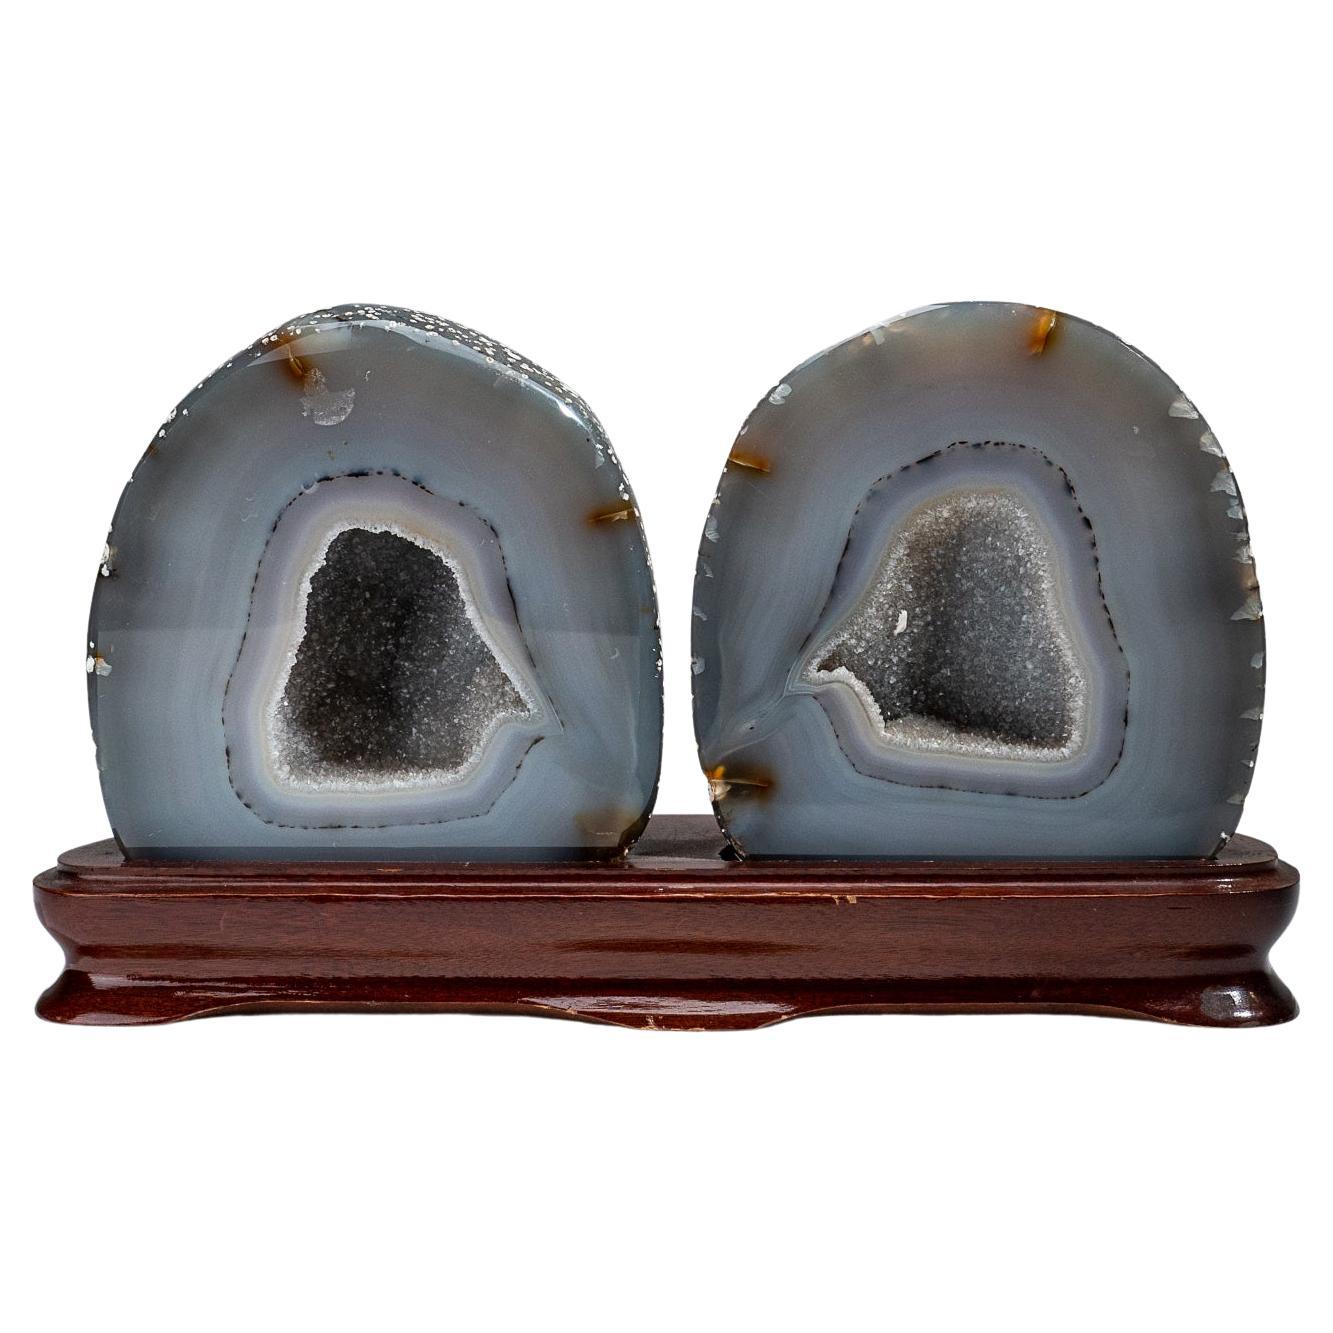 Two Genuine Banded Agate Geode on Custome Wooden Stand, '8 lbs'